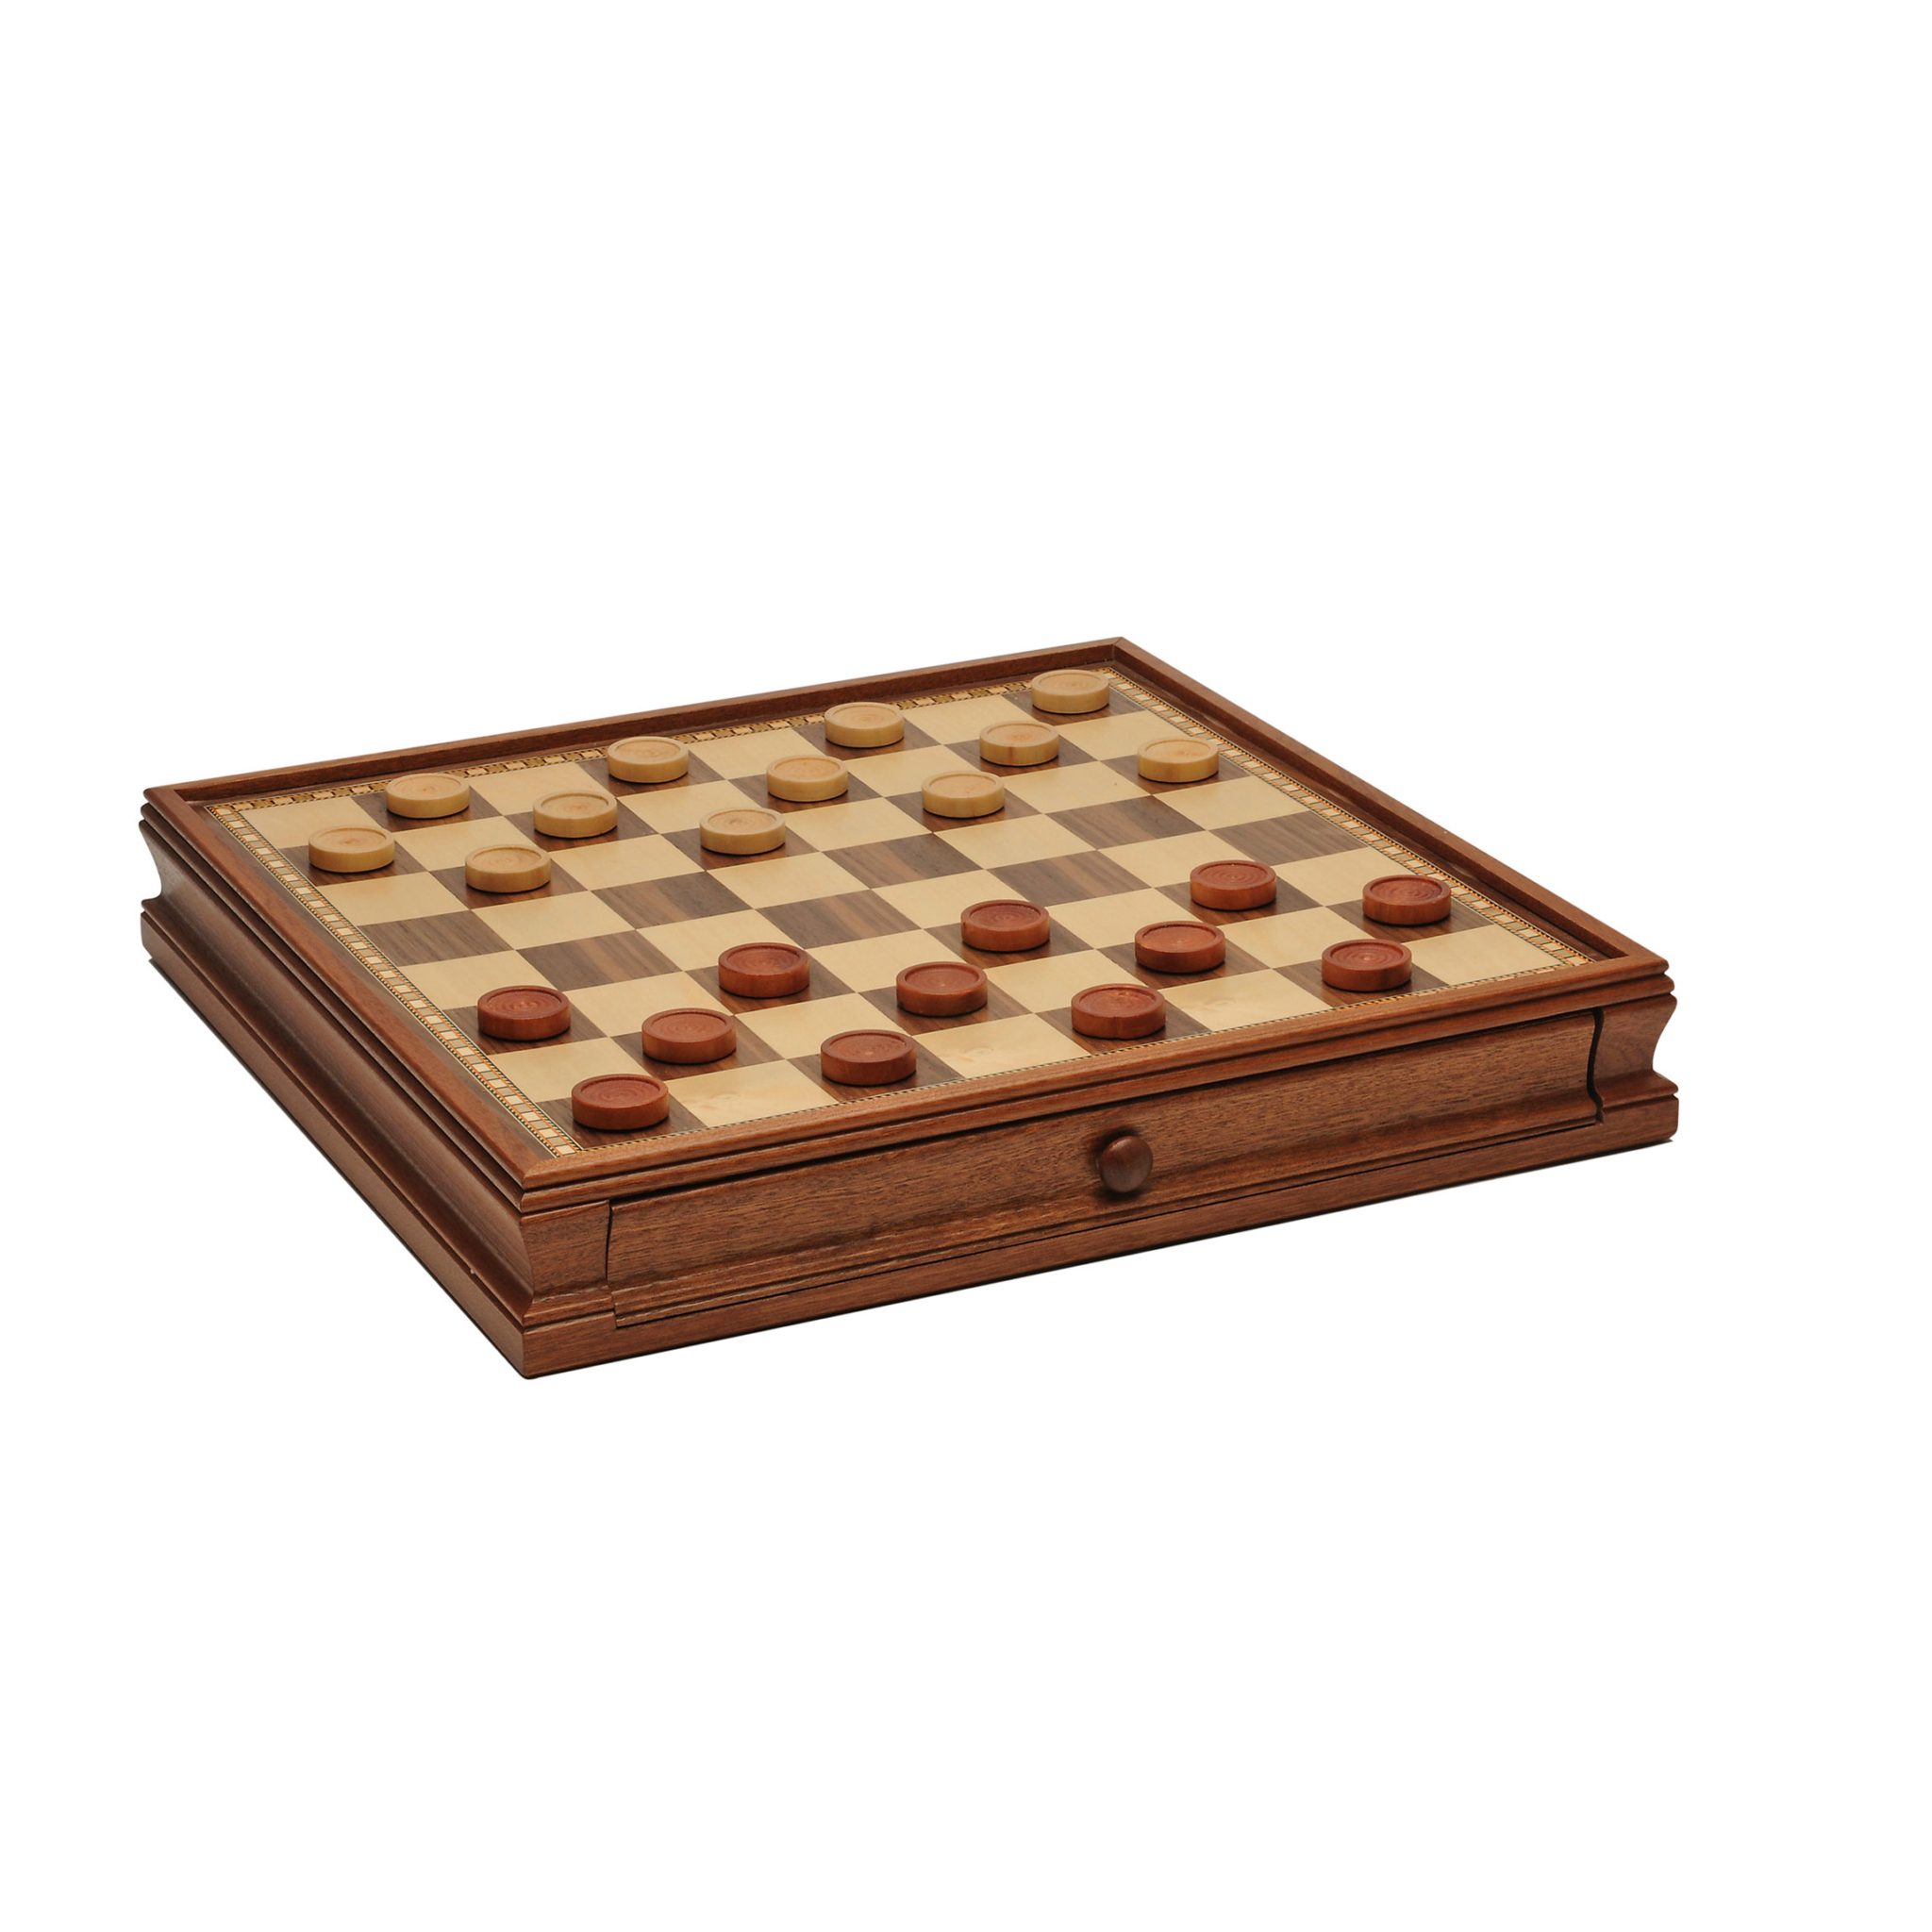 Russian Style Chess Checkers Game Set, Wooden Checkers Set With Storage